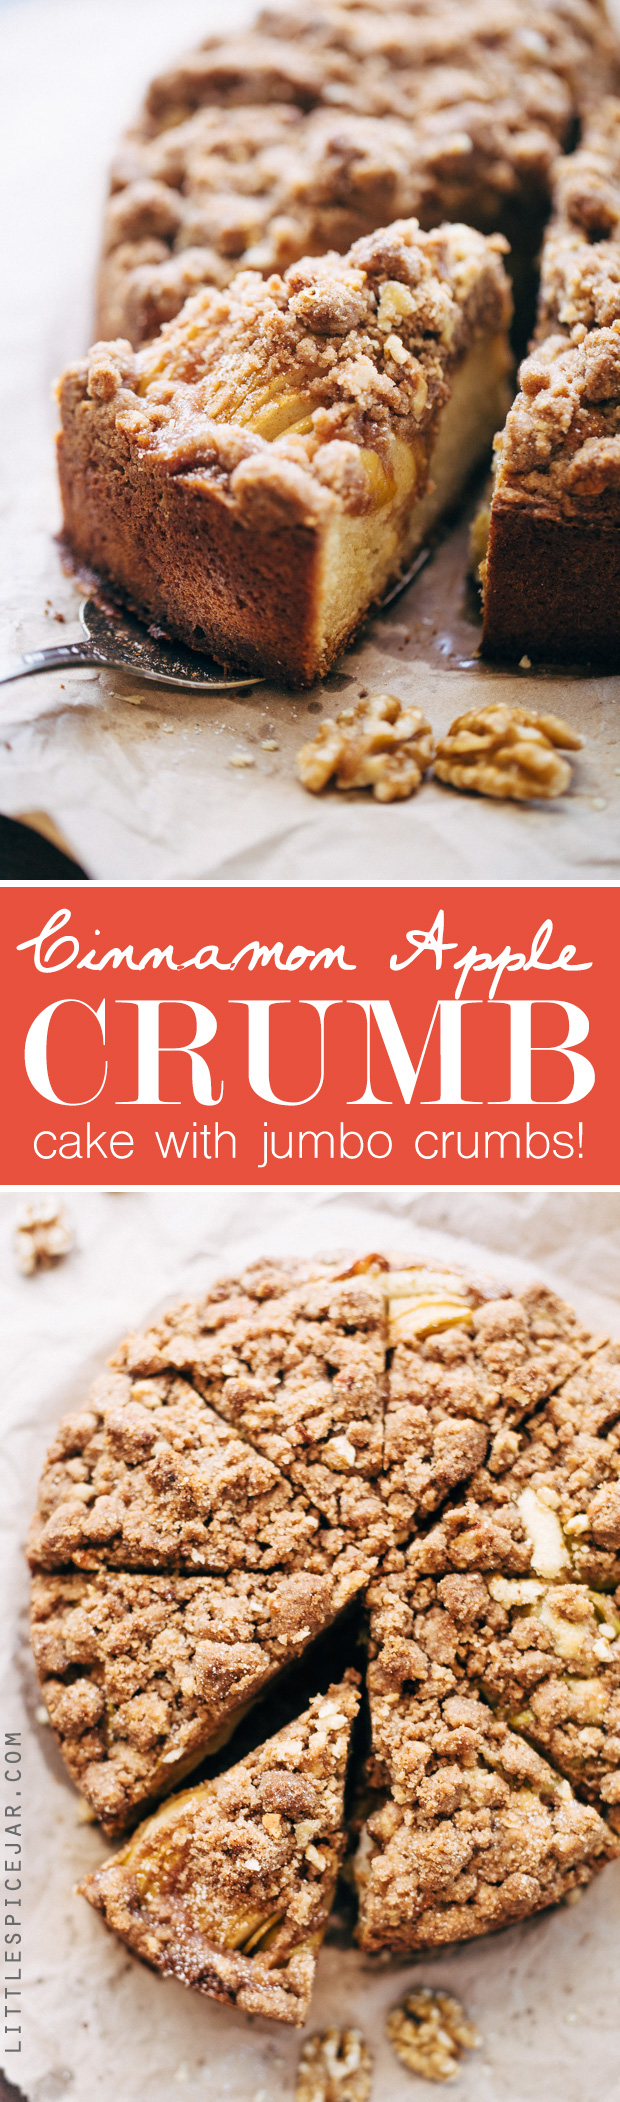 Cinnamon Apple Crumb Cake - A simple coffee cake topped with sliced apples and lots of jump lump crumbs. The perfect accompaniment to coffee of a crisp fall morning! #coffeecake #applecrumbcake #crumbcake | Littlespicejar.com